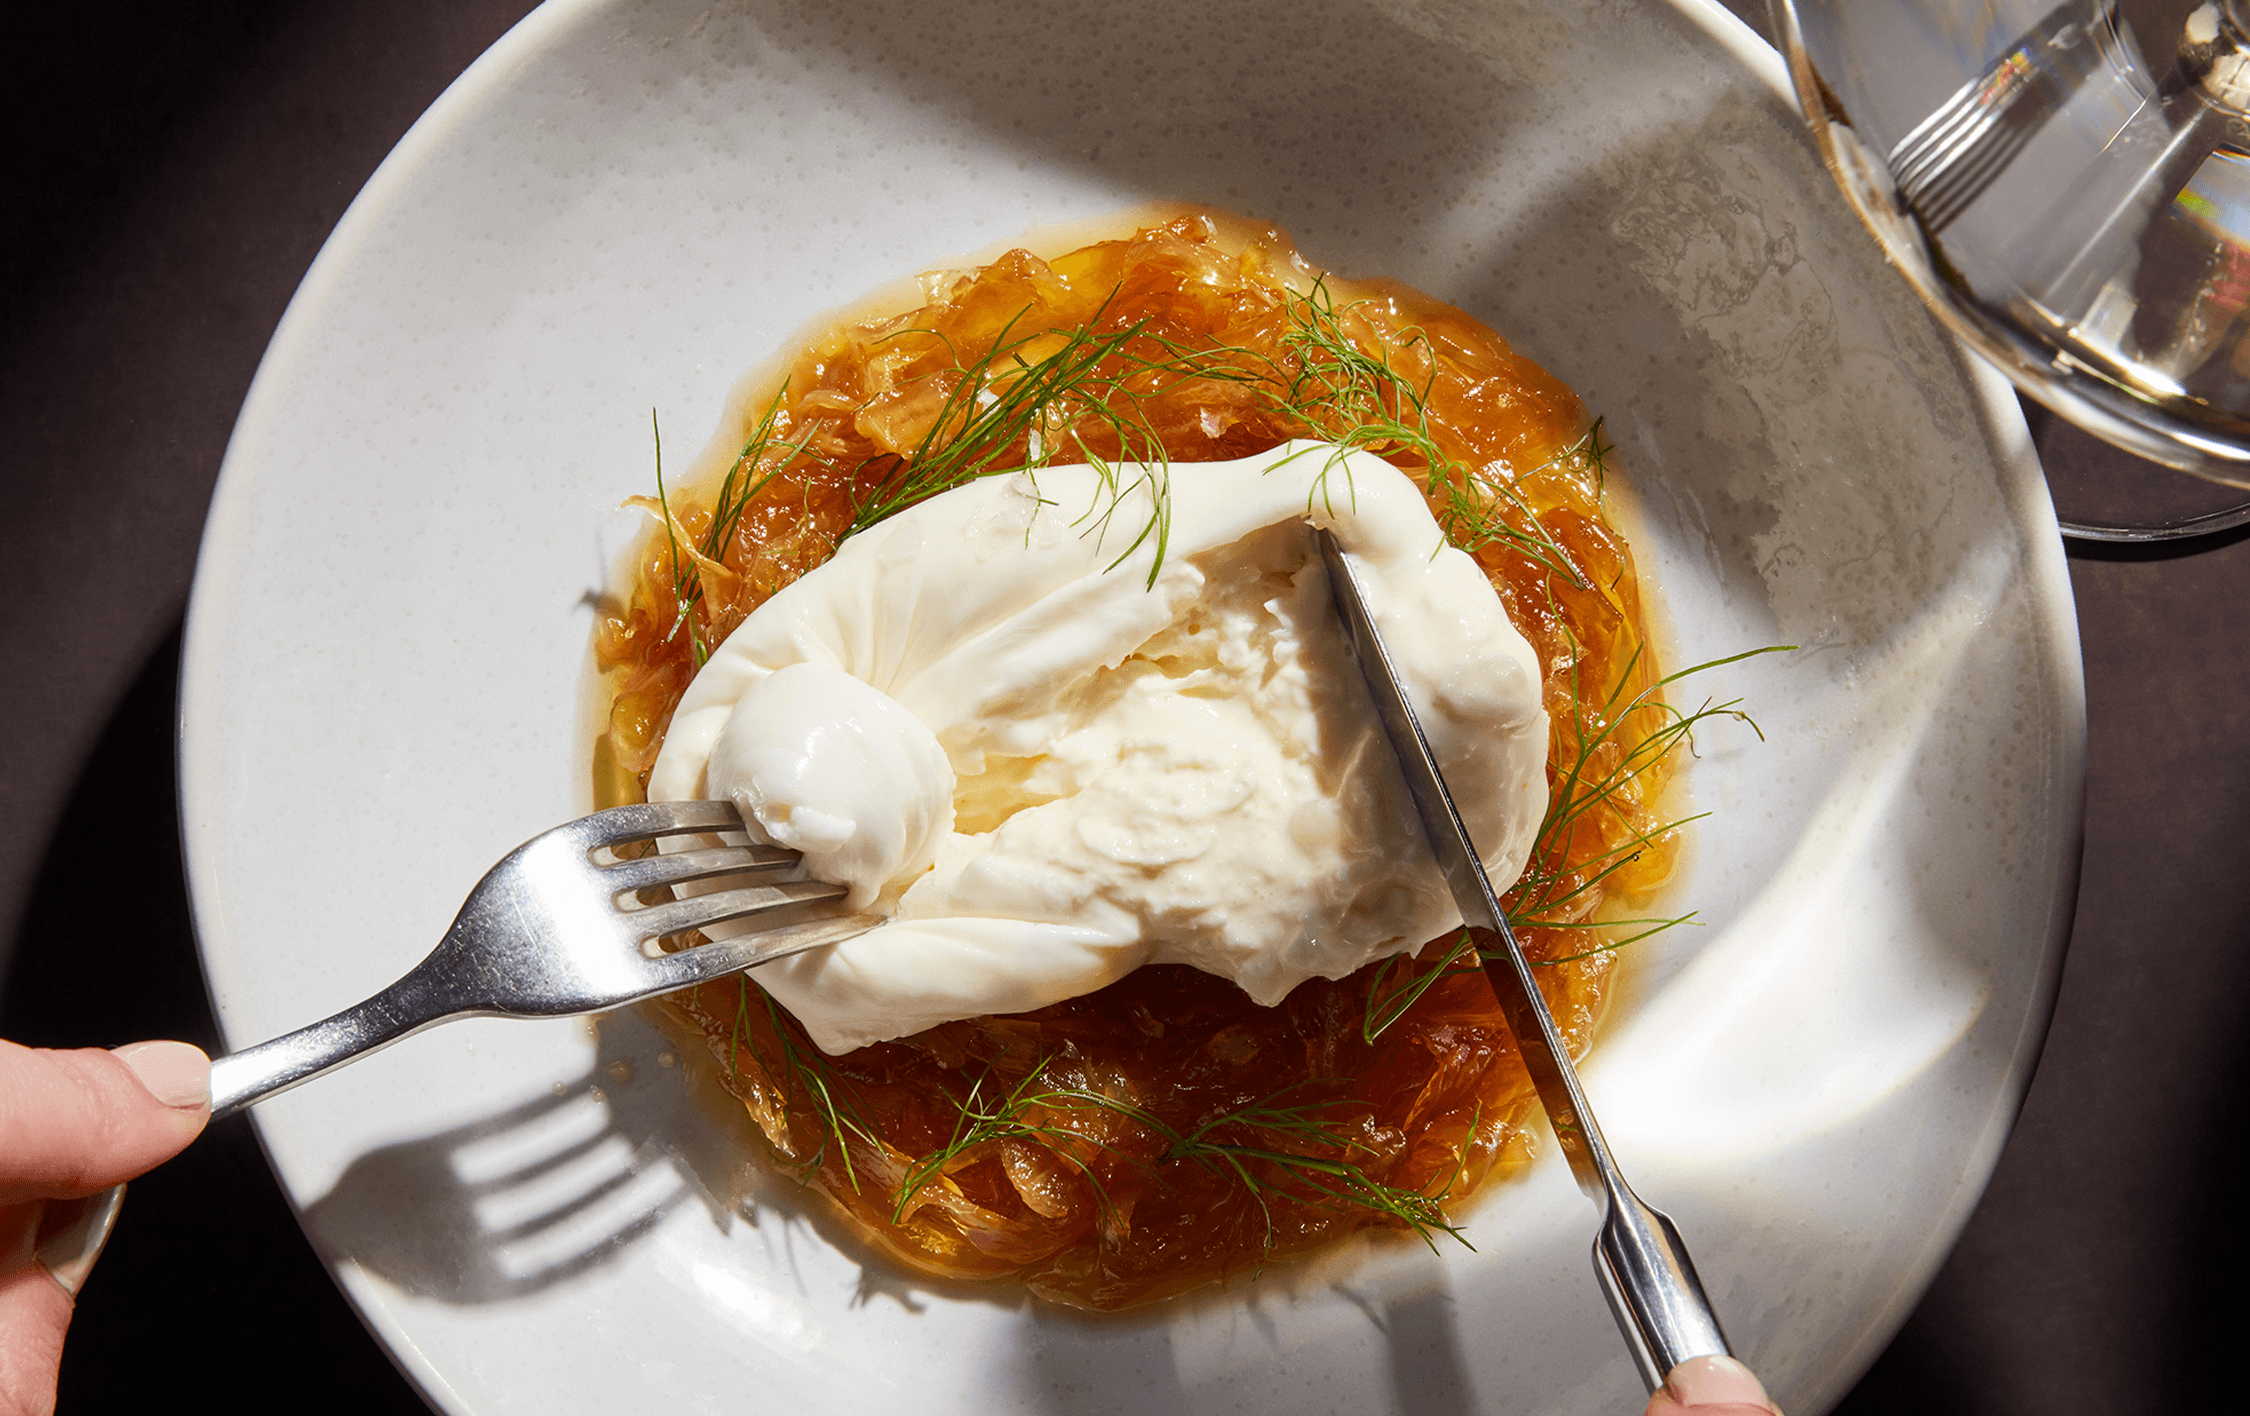 A burrata being cut into by a fork at Nomad, one of Melbourne CBDs best restaurants.